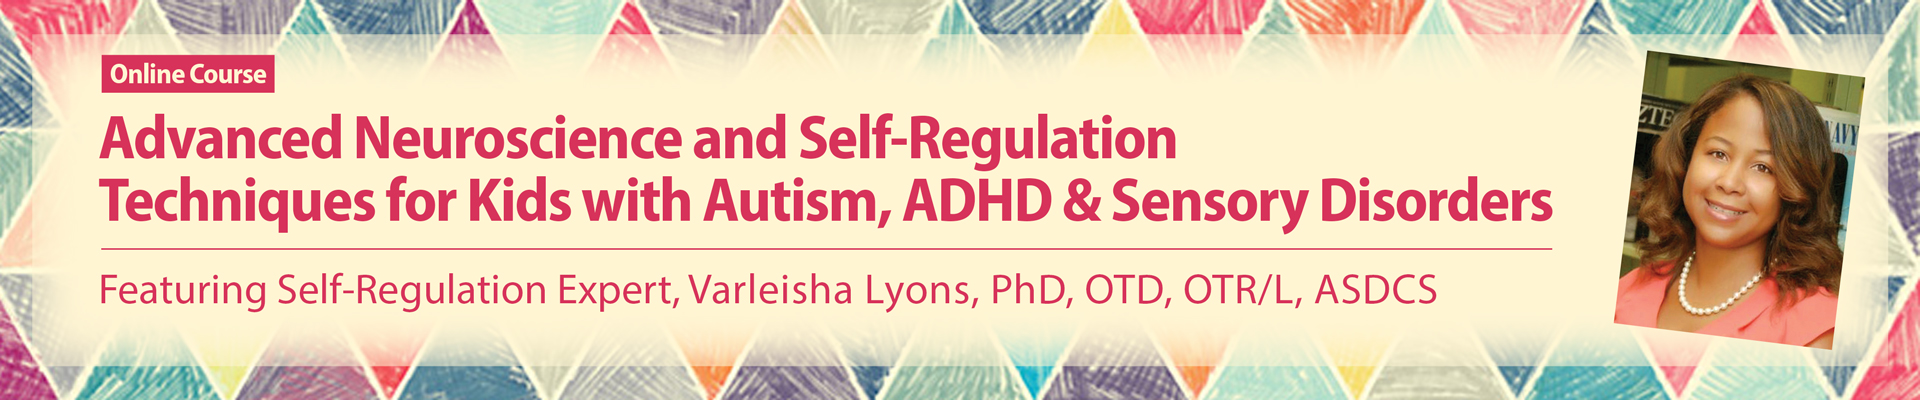 Advanced Neuroscience and Self-Regulation Techniques for Kids with Autism, ADHD & Sensory Disorders